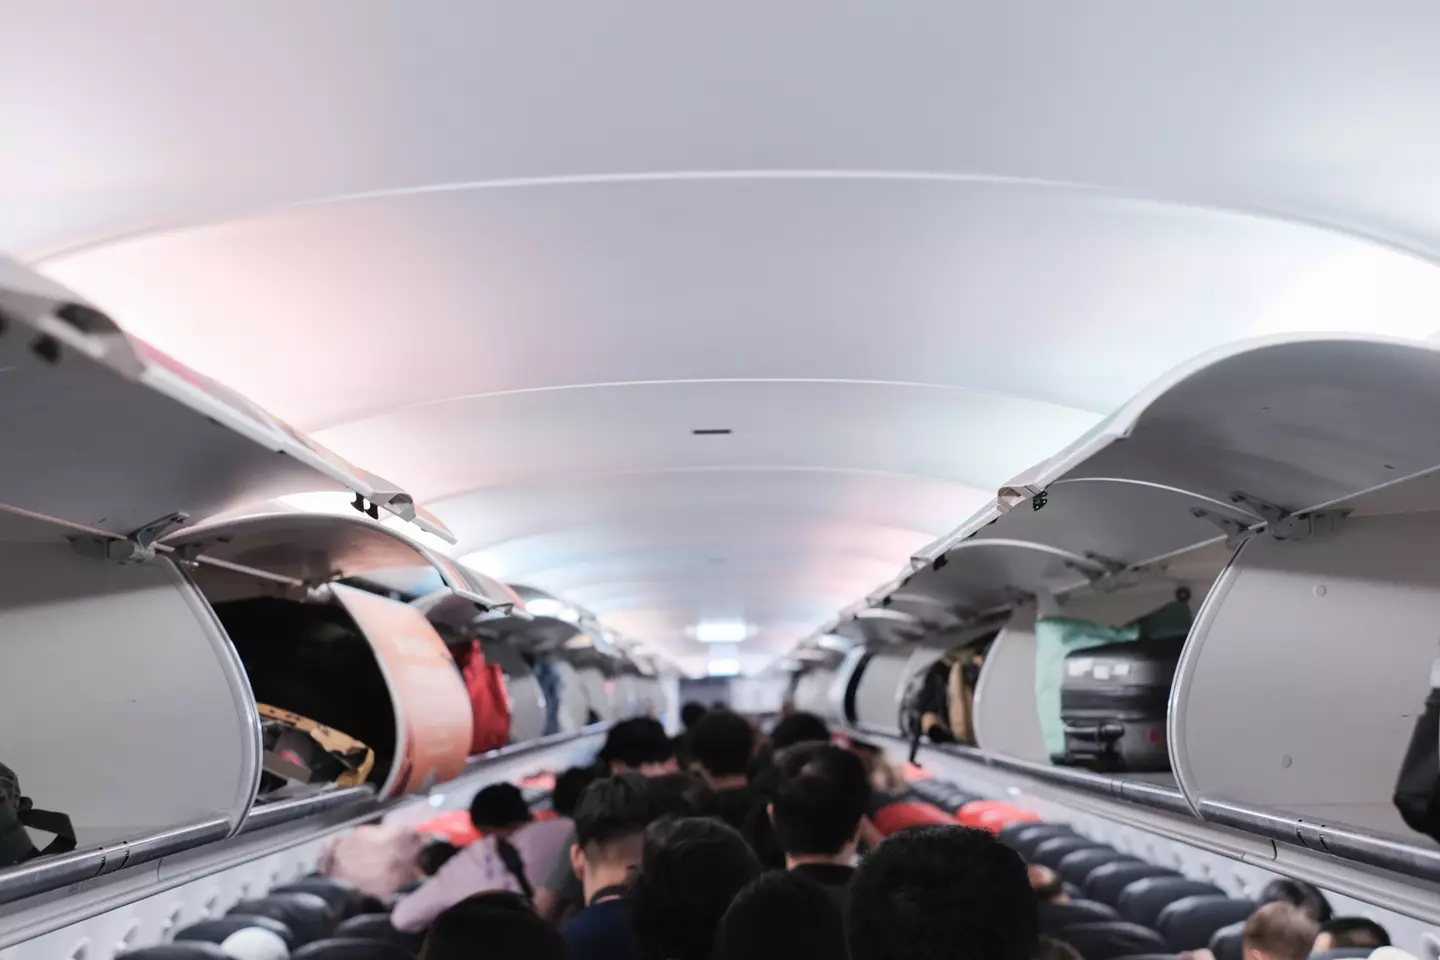 There are concerns that those who board last won't have overhead cabin space.